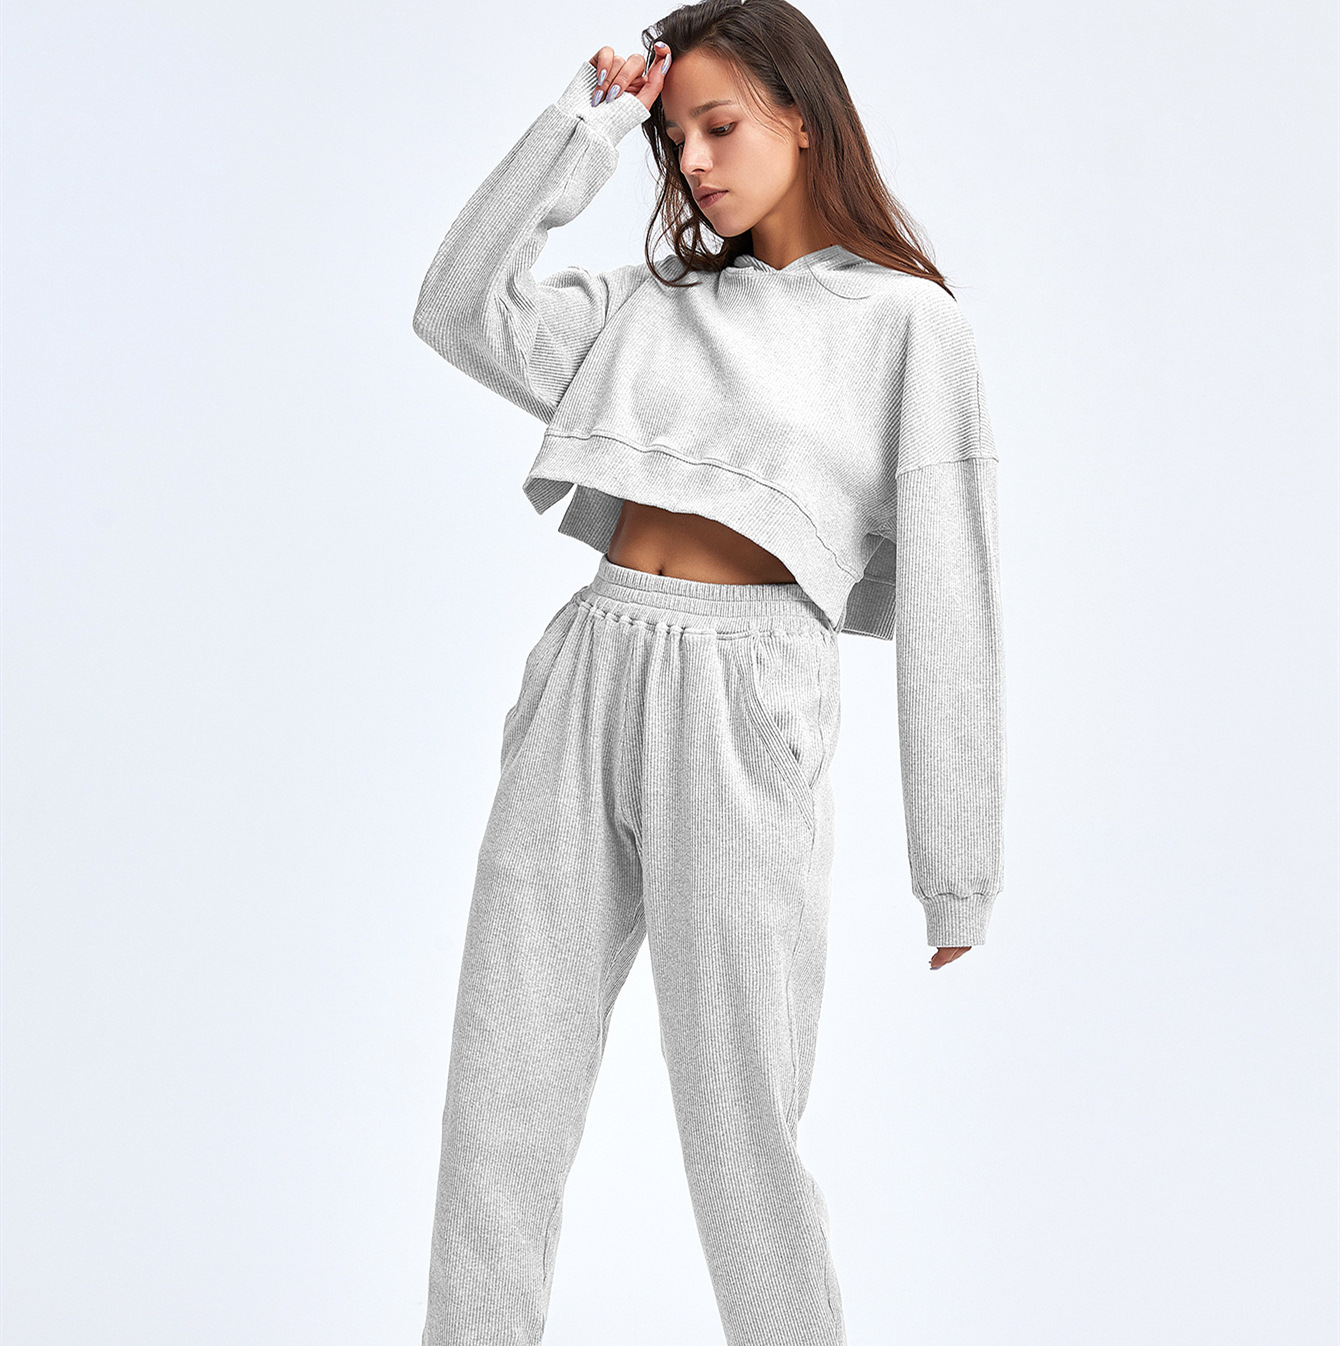 Custom women clothing design crop top hooded sweatshirts and jogger sweatpants suit with logo